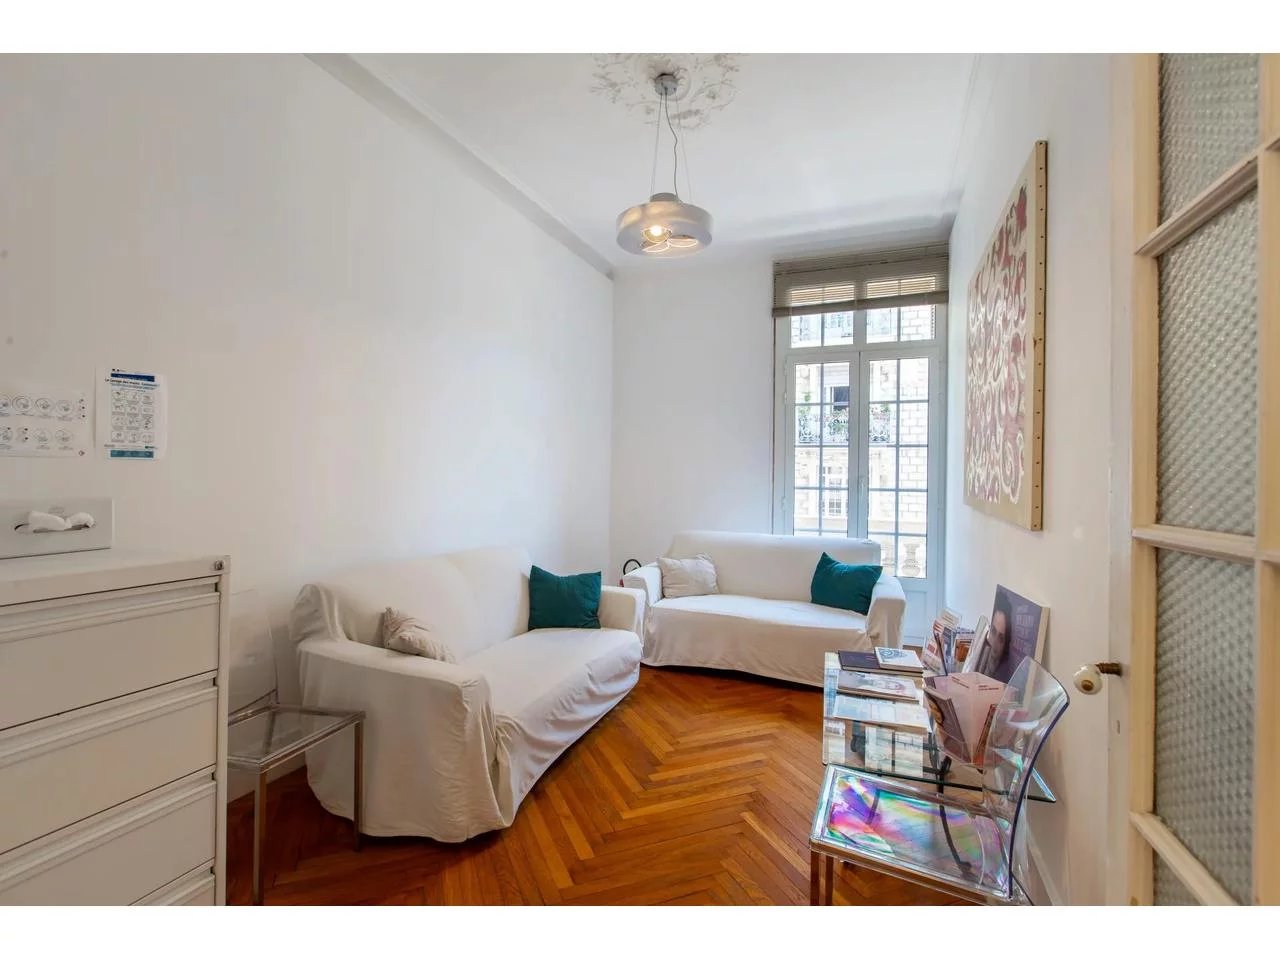 Appartement  6 Rooms 154m2  for sale  1 120 000 €